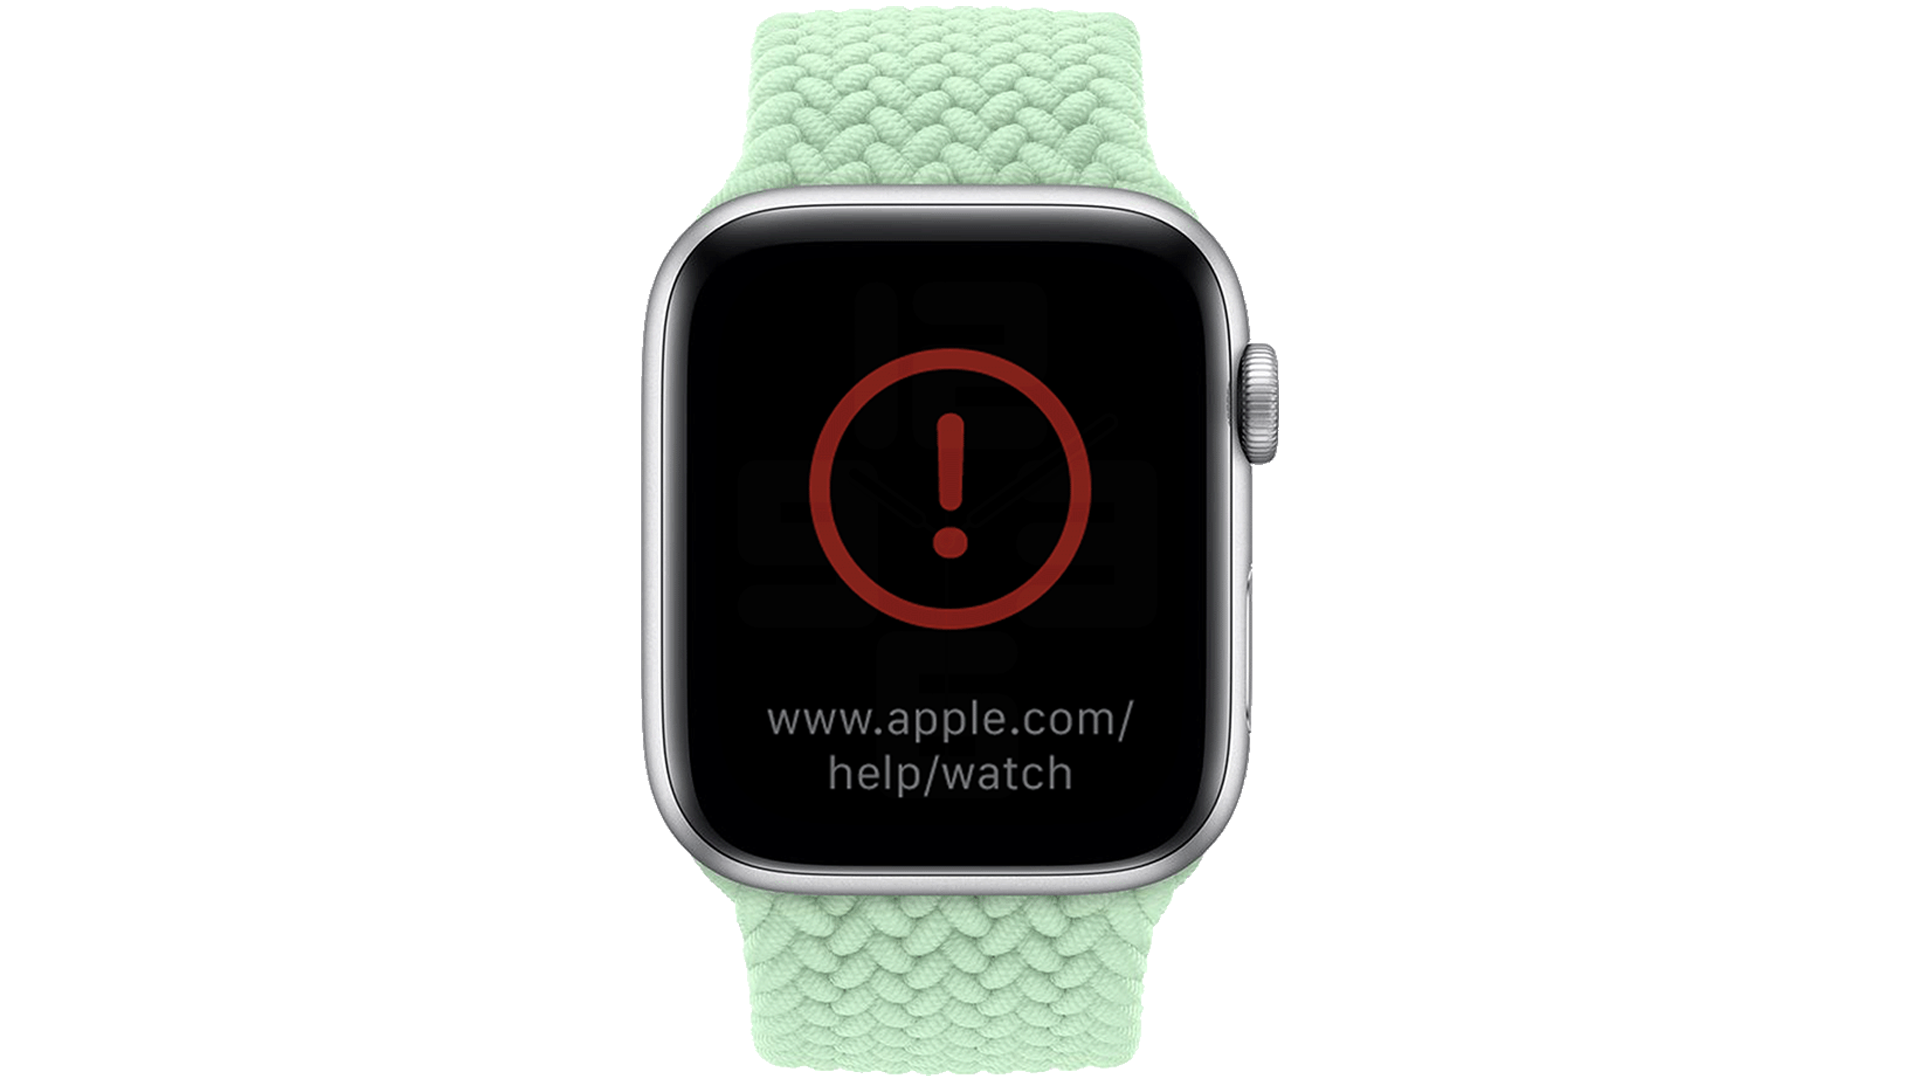 Apple Watch in recovery mode